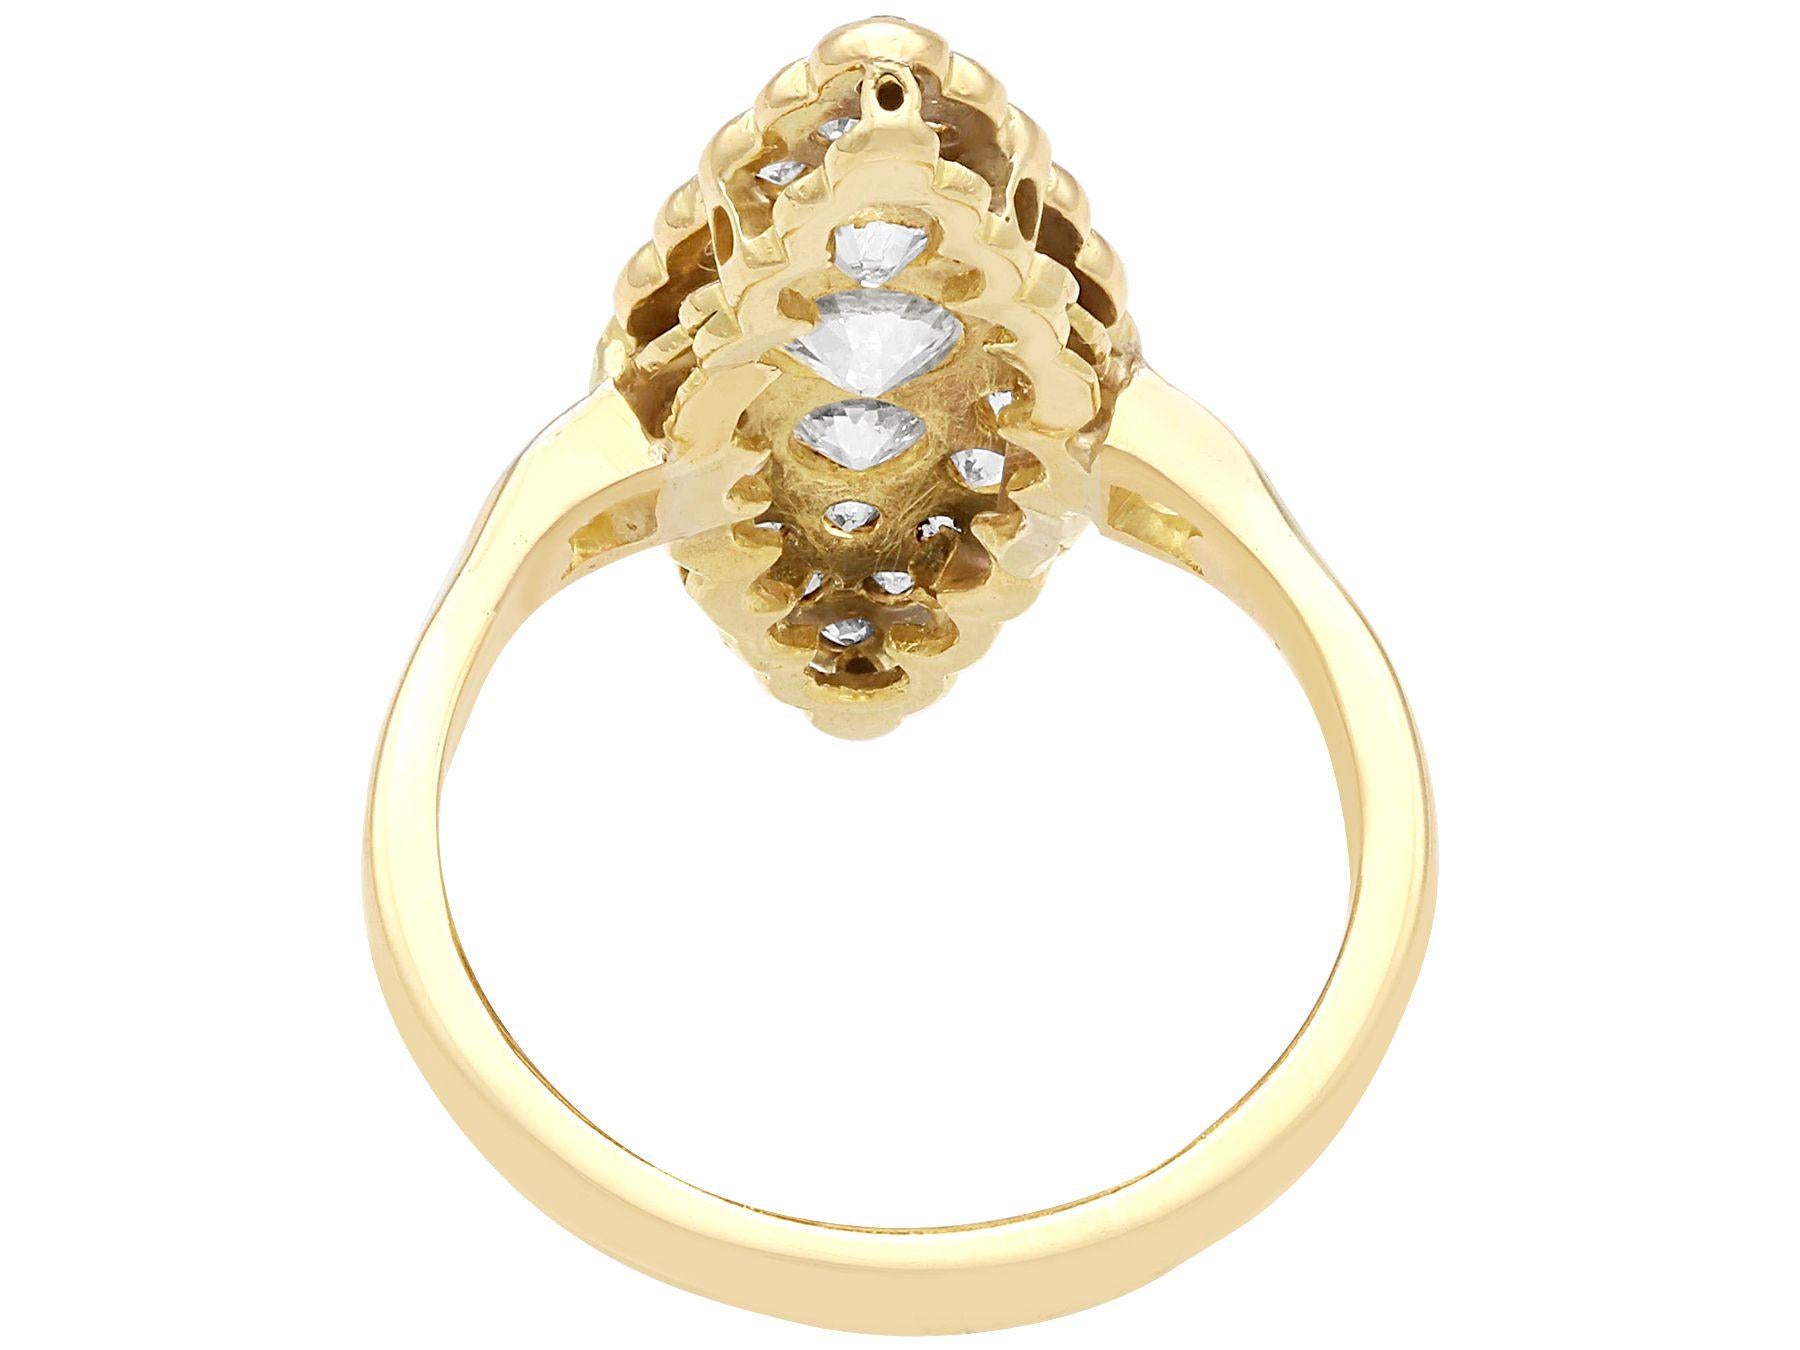 Antique 1.58 Carat Diamond and 18k Yellow Gold Marquise Shaped Dress Ring In Excellent Condition For Sale In Jesmond, Newcastle Upon Tyne